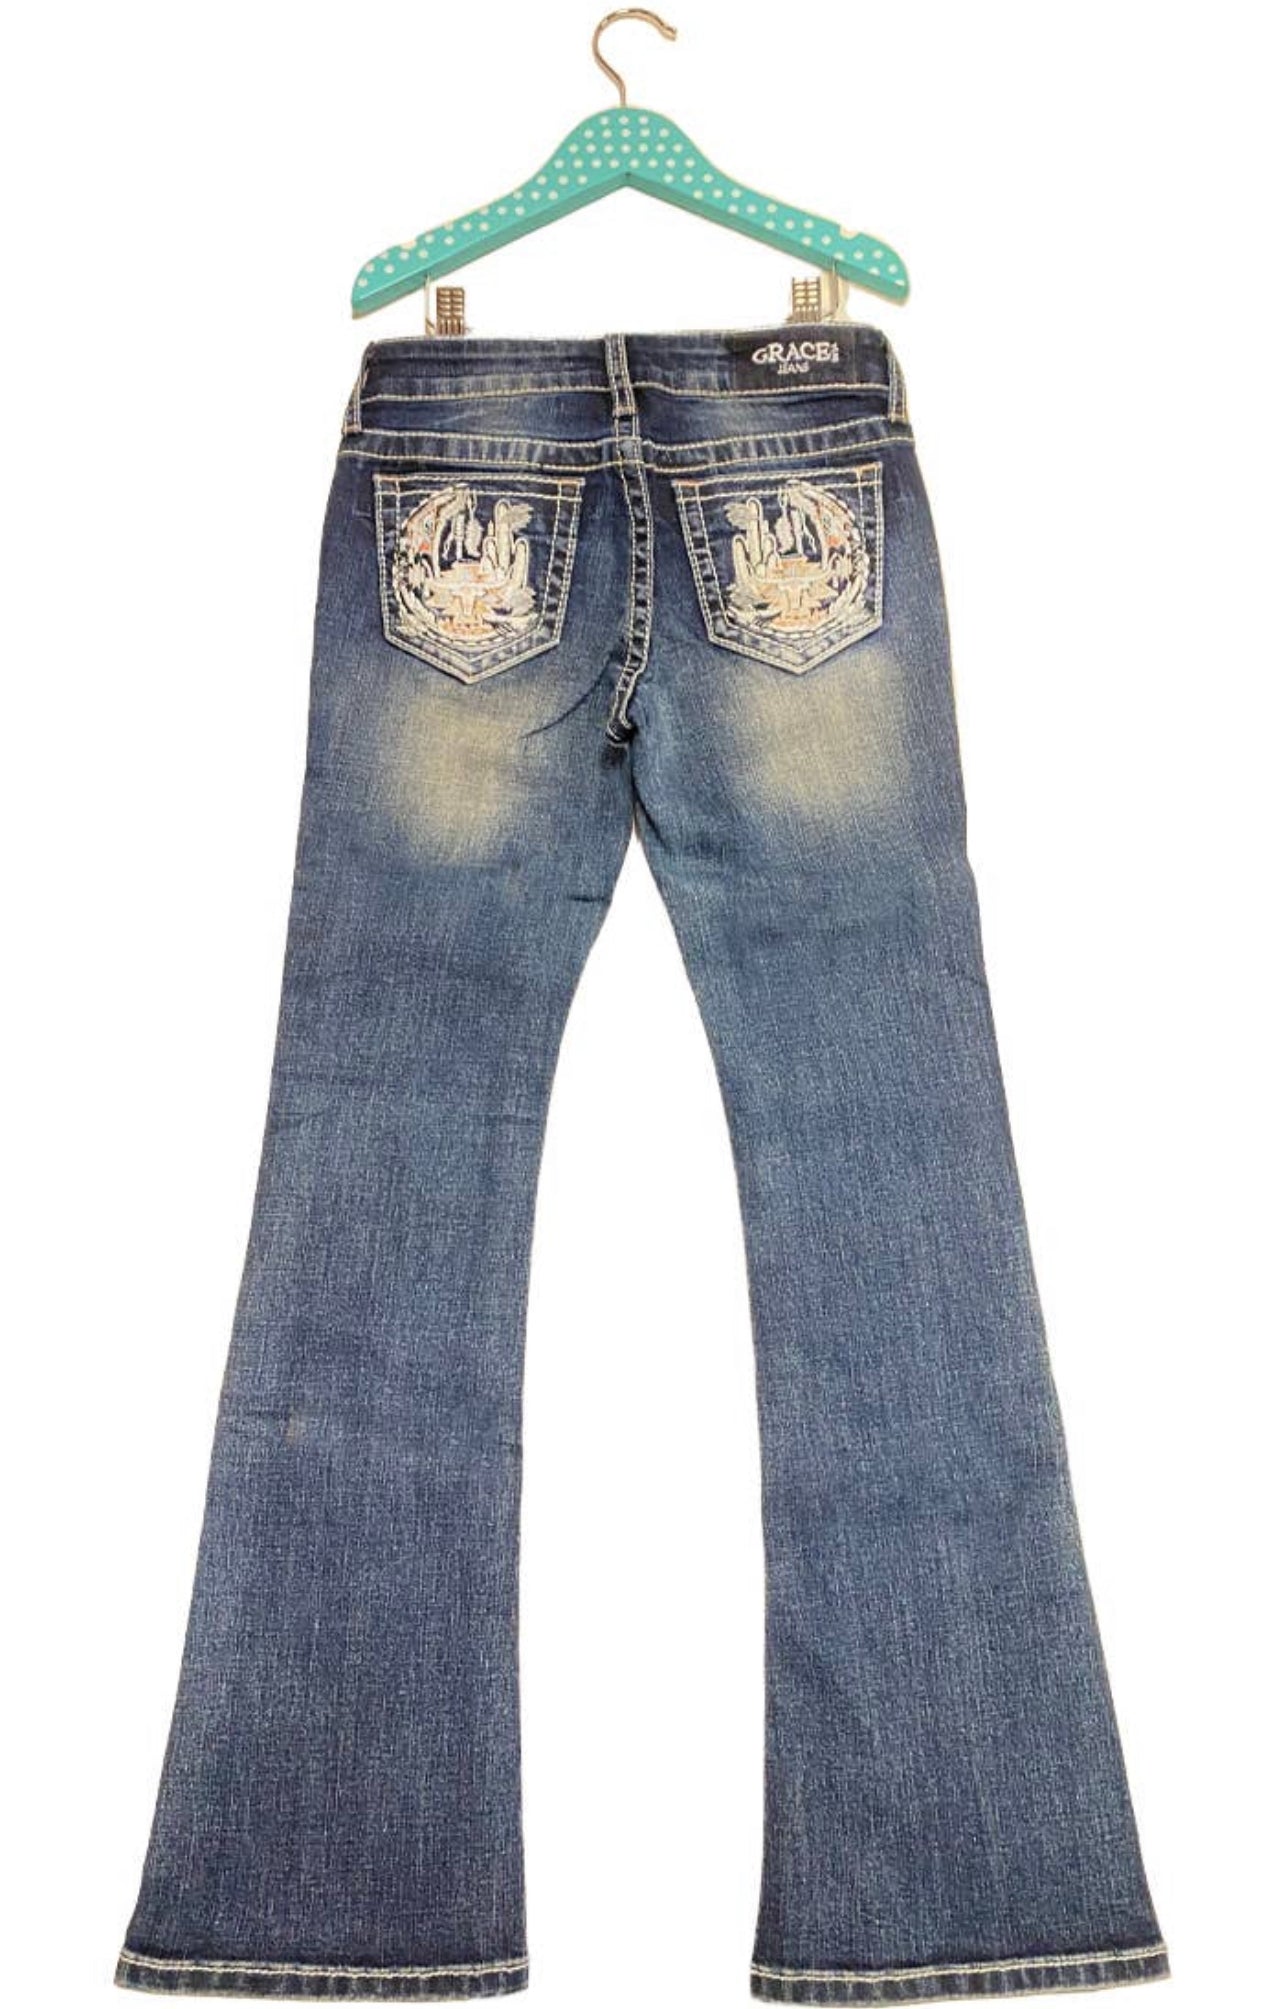 Moon embroidery girl boot cut jeans